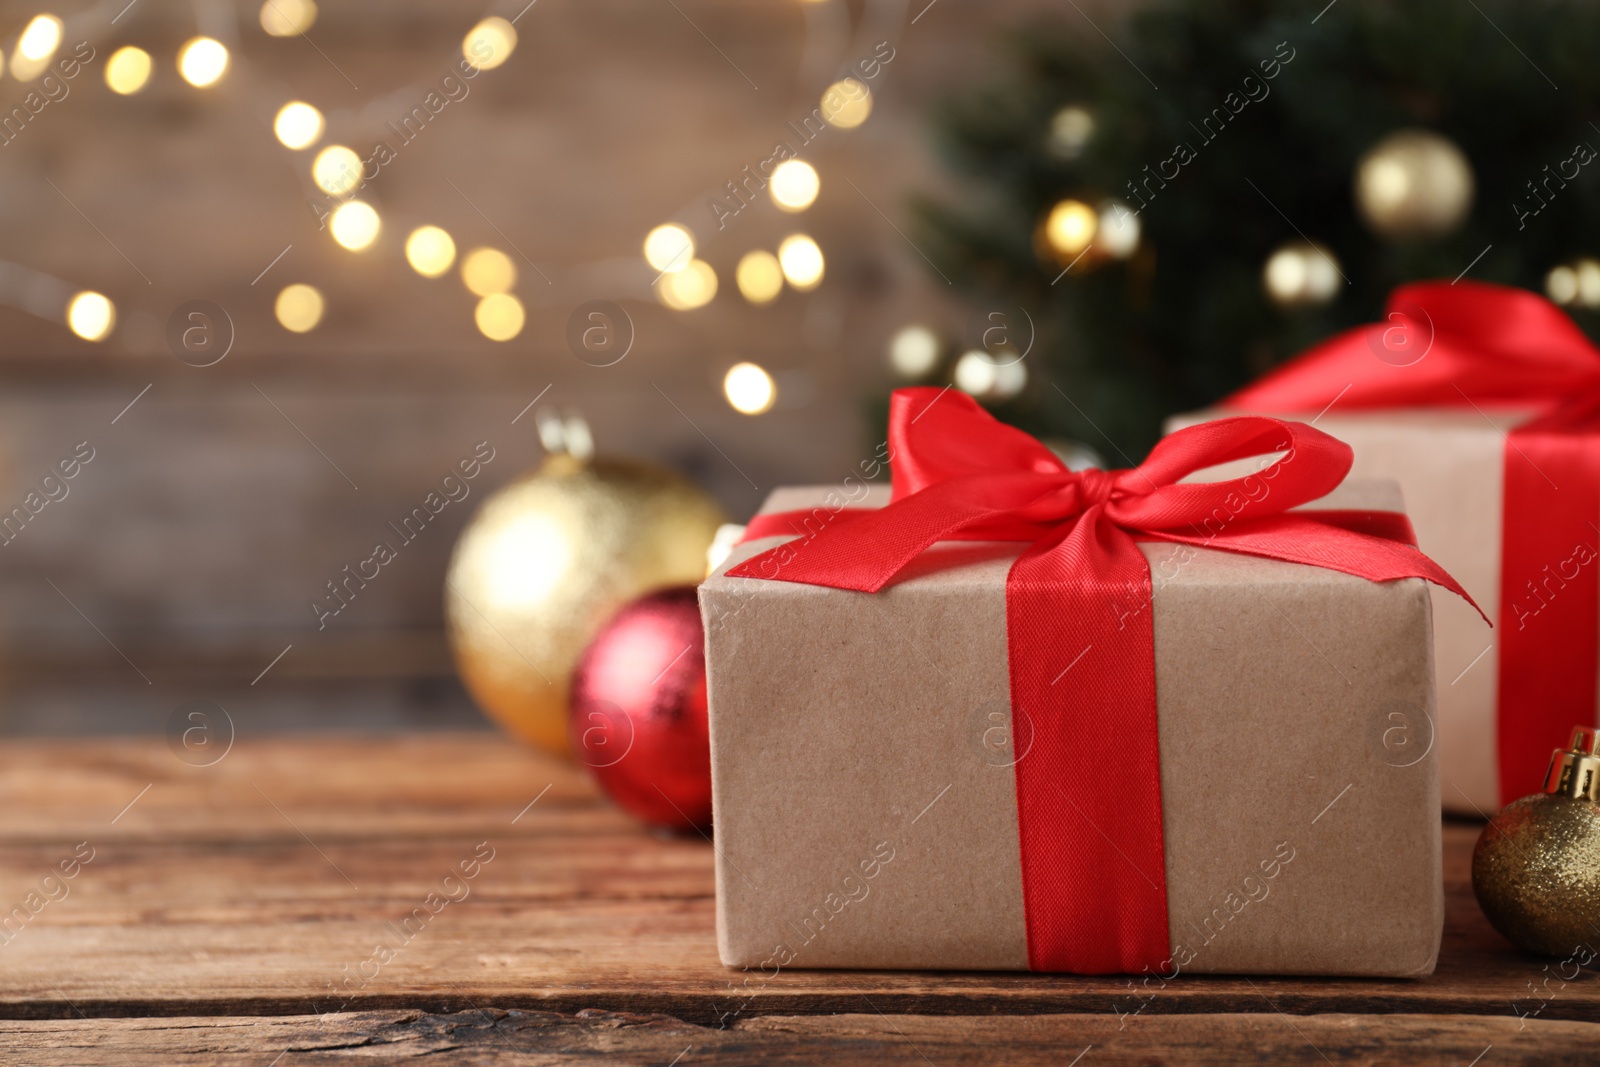 Photo of Christmas gift box with red ribbon and golden bauble on wooden table against blurred lights, space for text